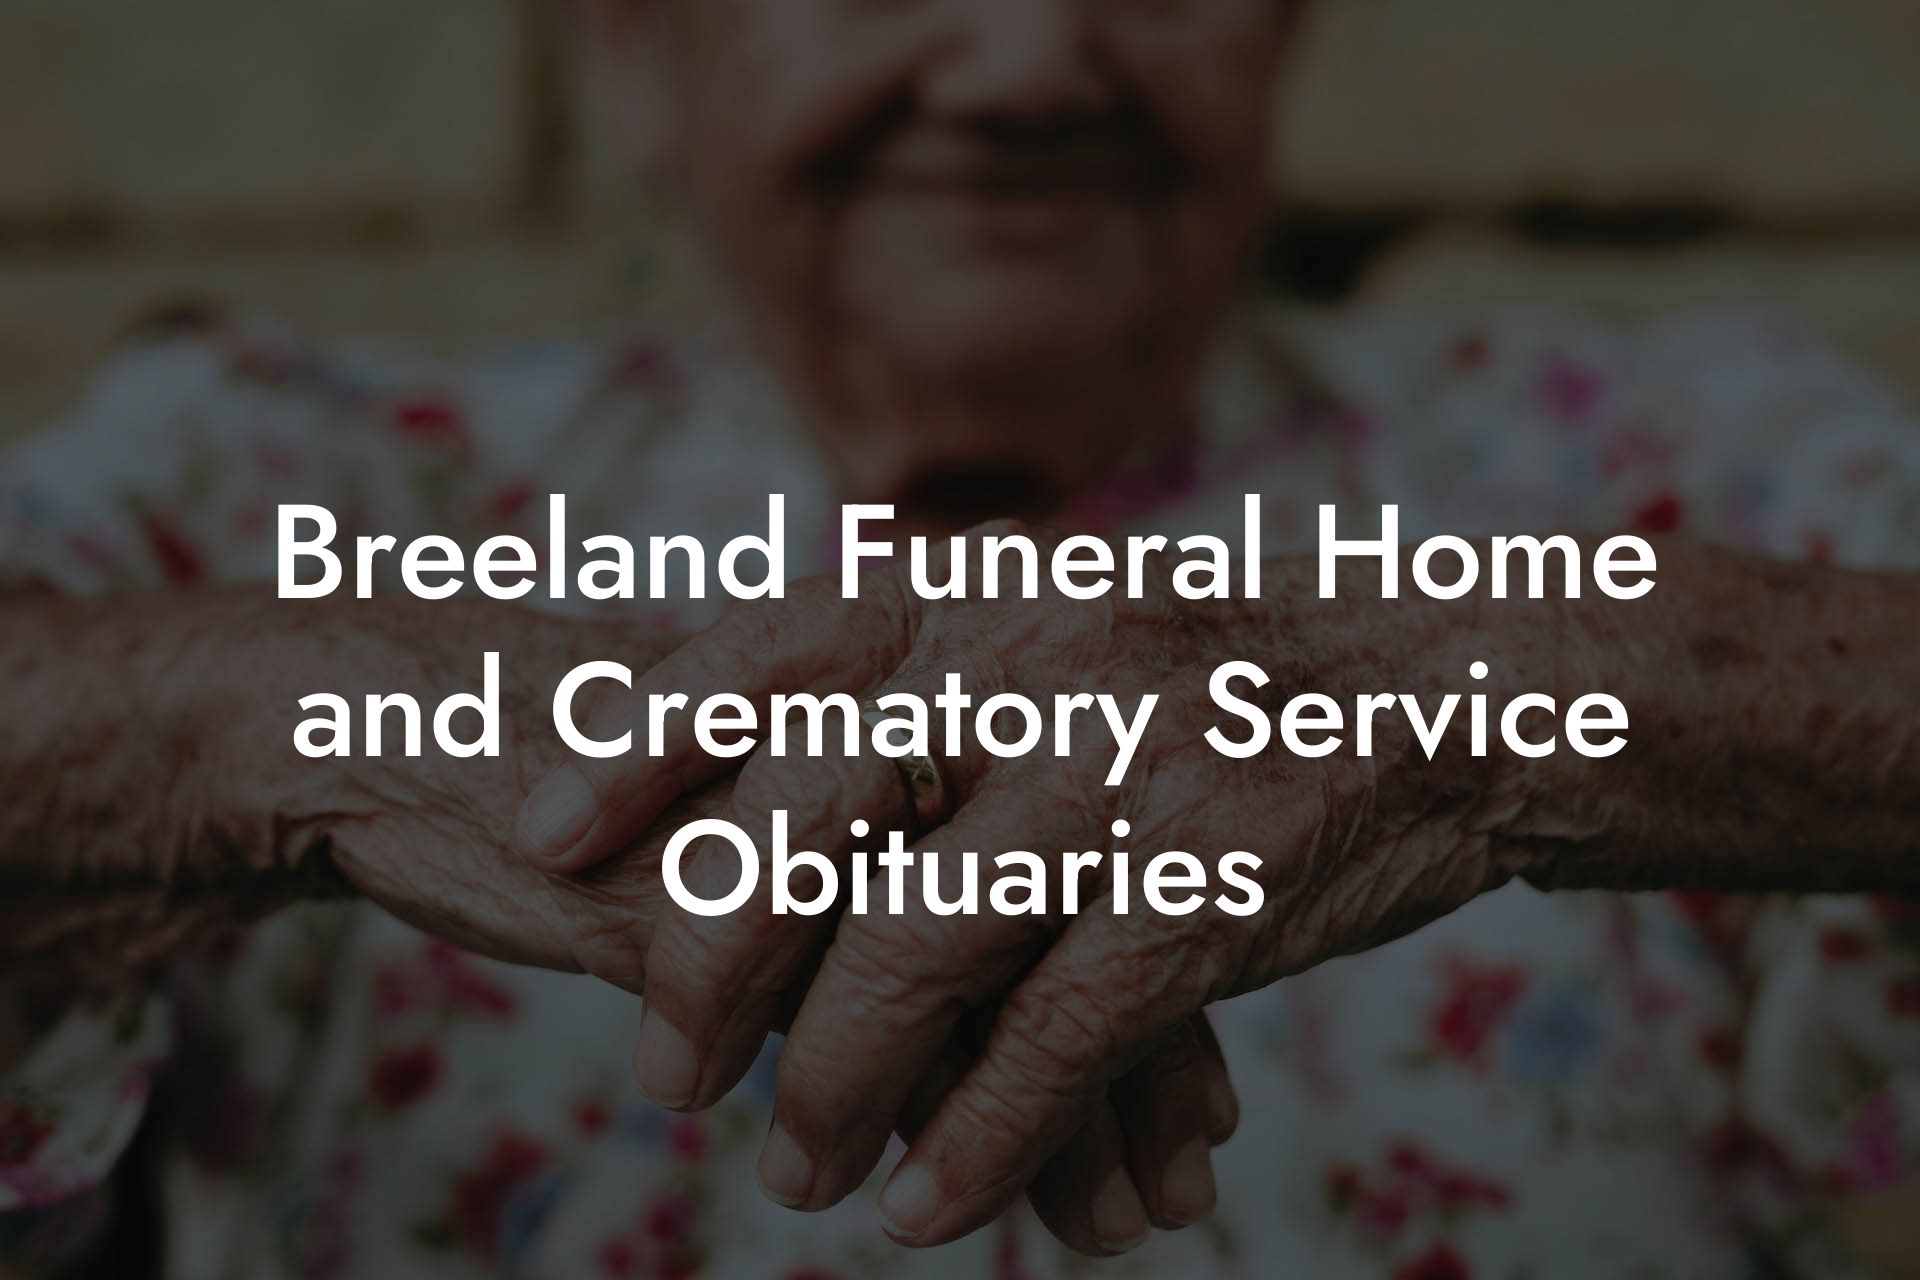 Breeland Funeral Home and Crematory Service Obituaries